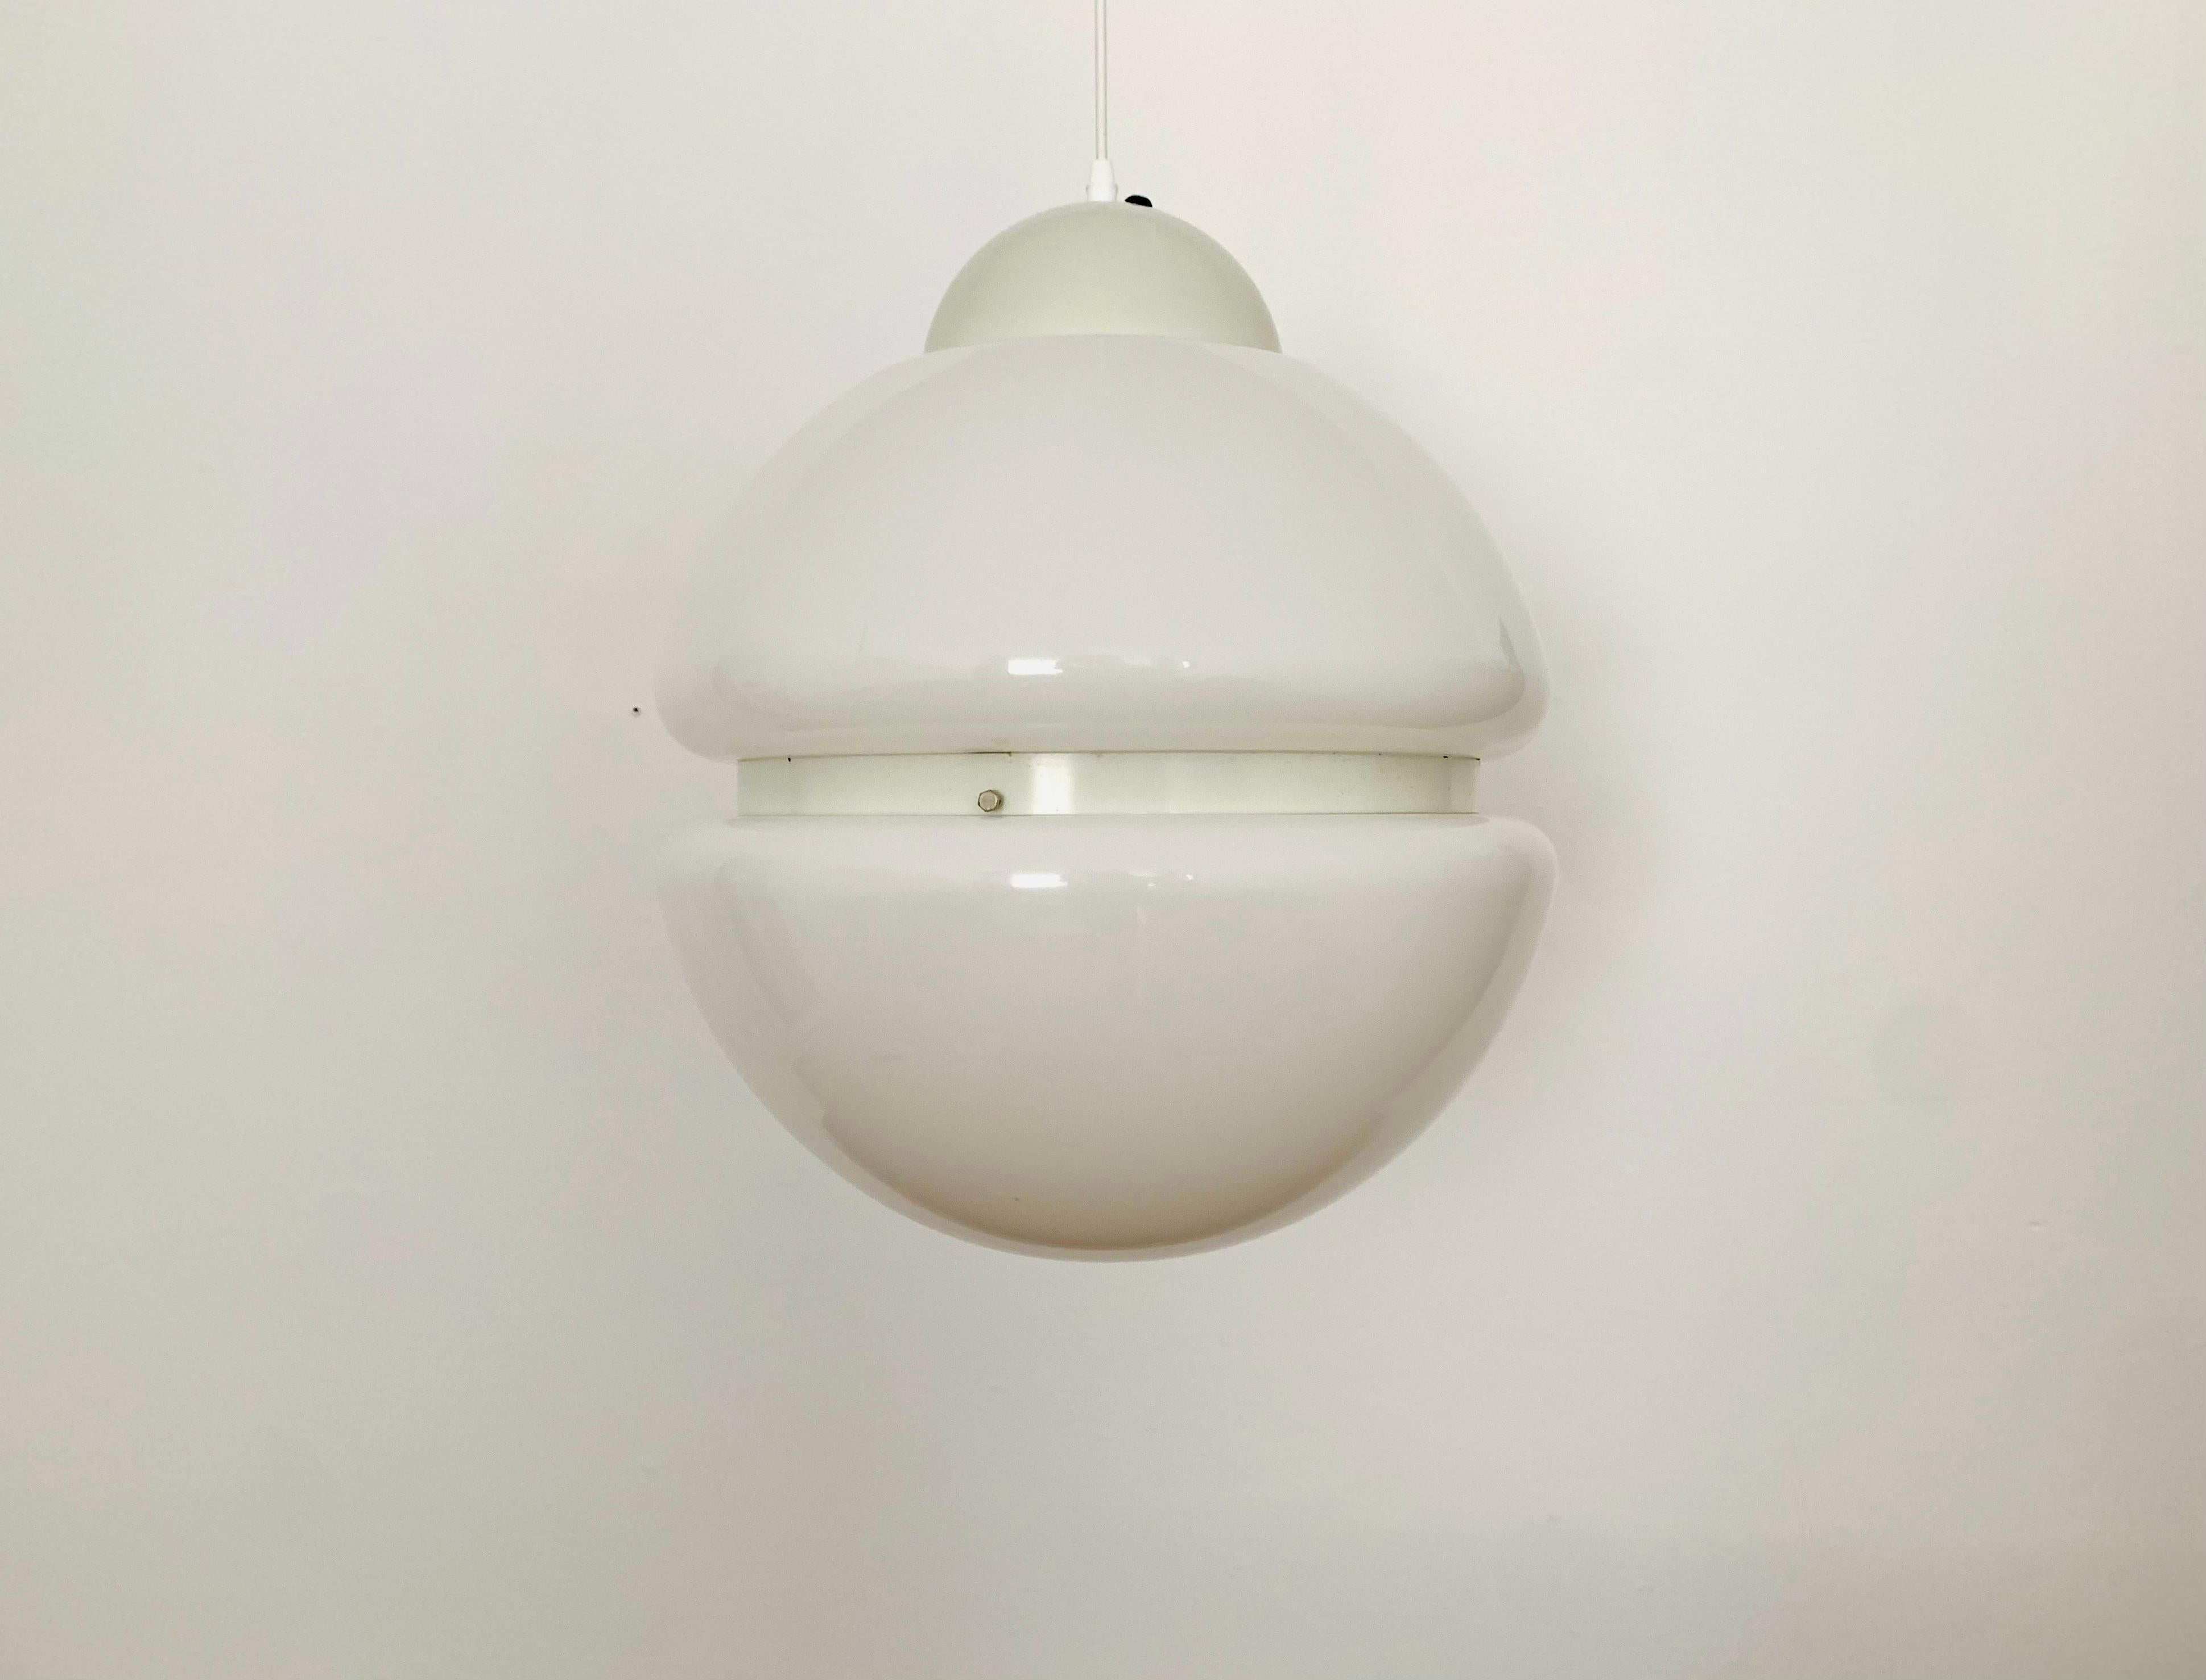 Beautiful Italian pendant lamp from the 1960s.
High-quality workmanship and extravagant design.
A warm light is created.

Condition:

Very good vintage condition with slight signs of age-related wear.
Light scratches on the plastic parts.
The metal